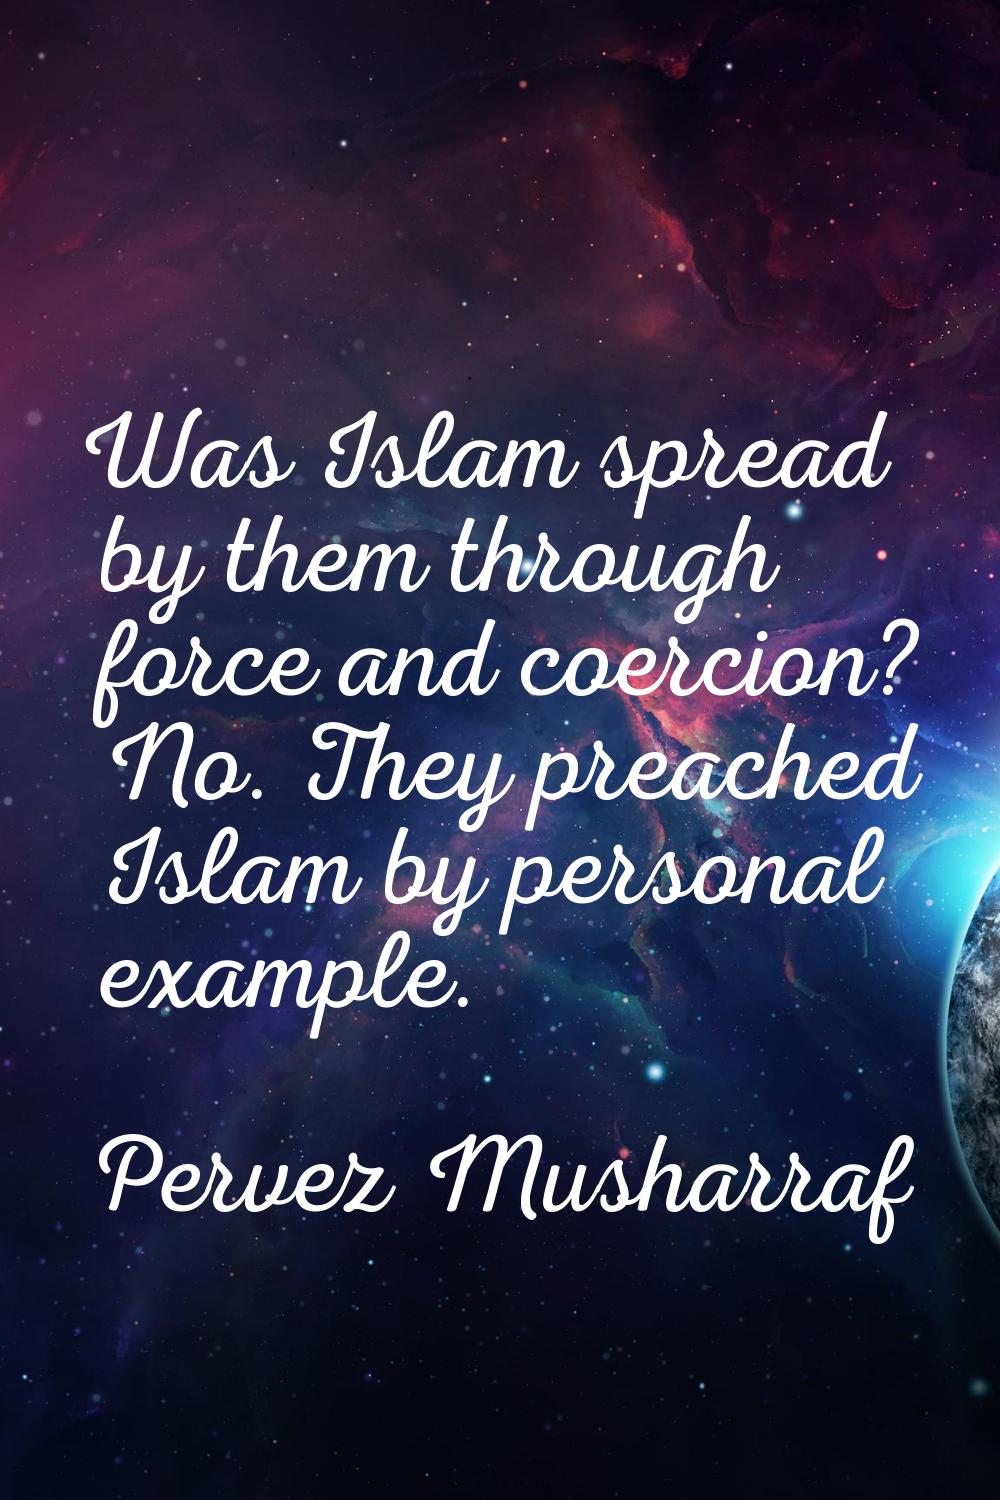 Was Islam spread by them through force and coercion? No. They preached Islam by personal example.